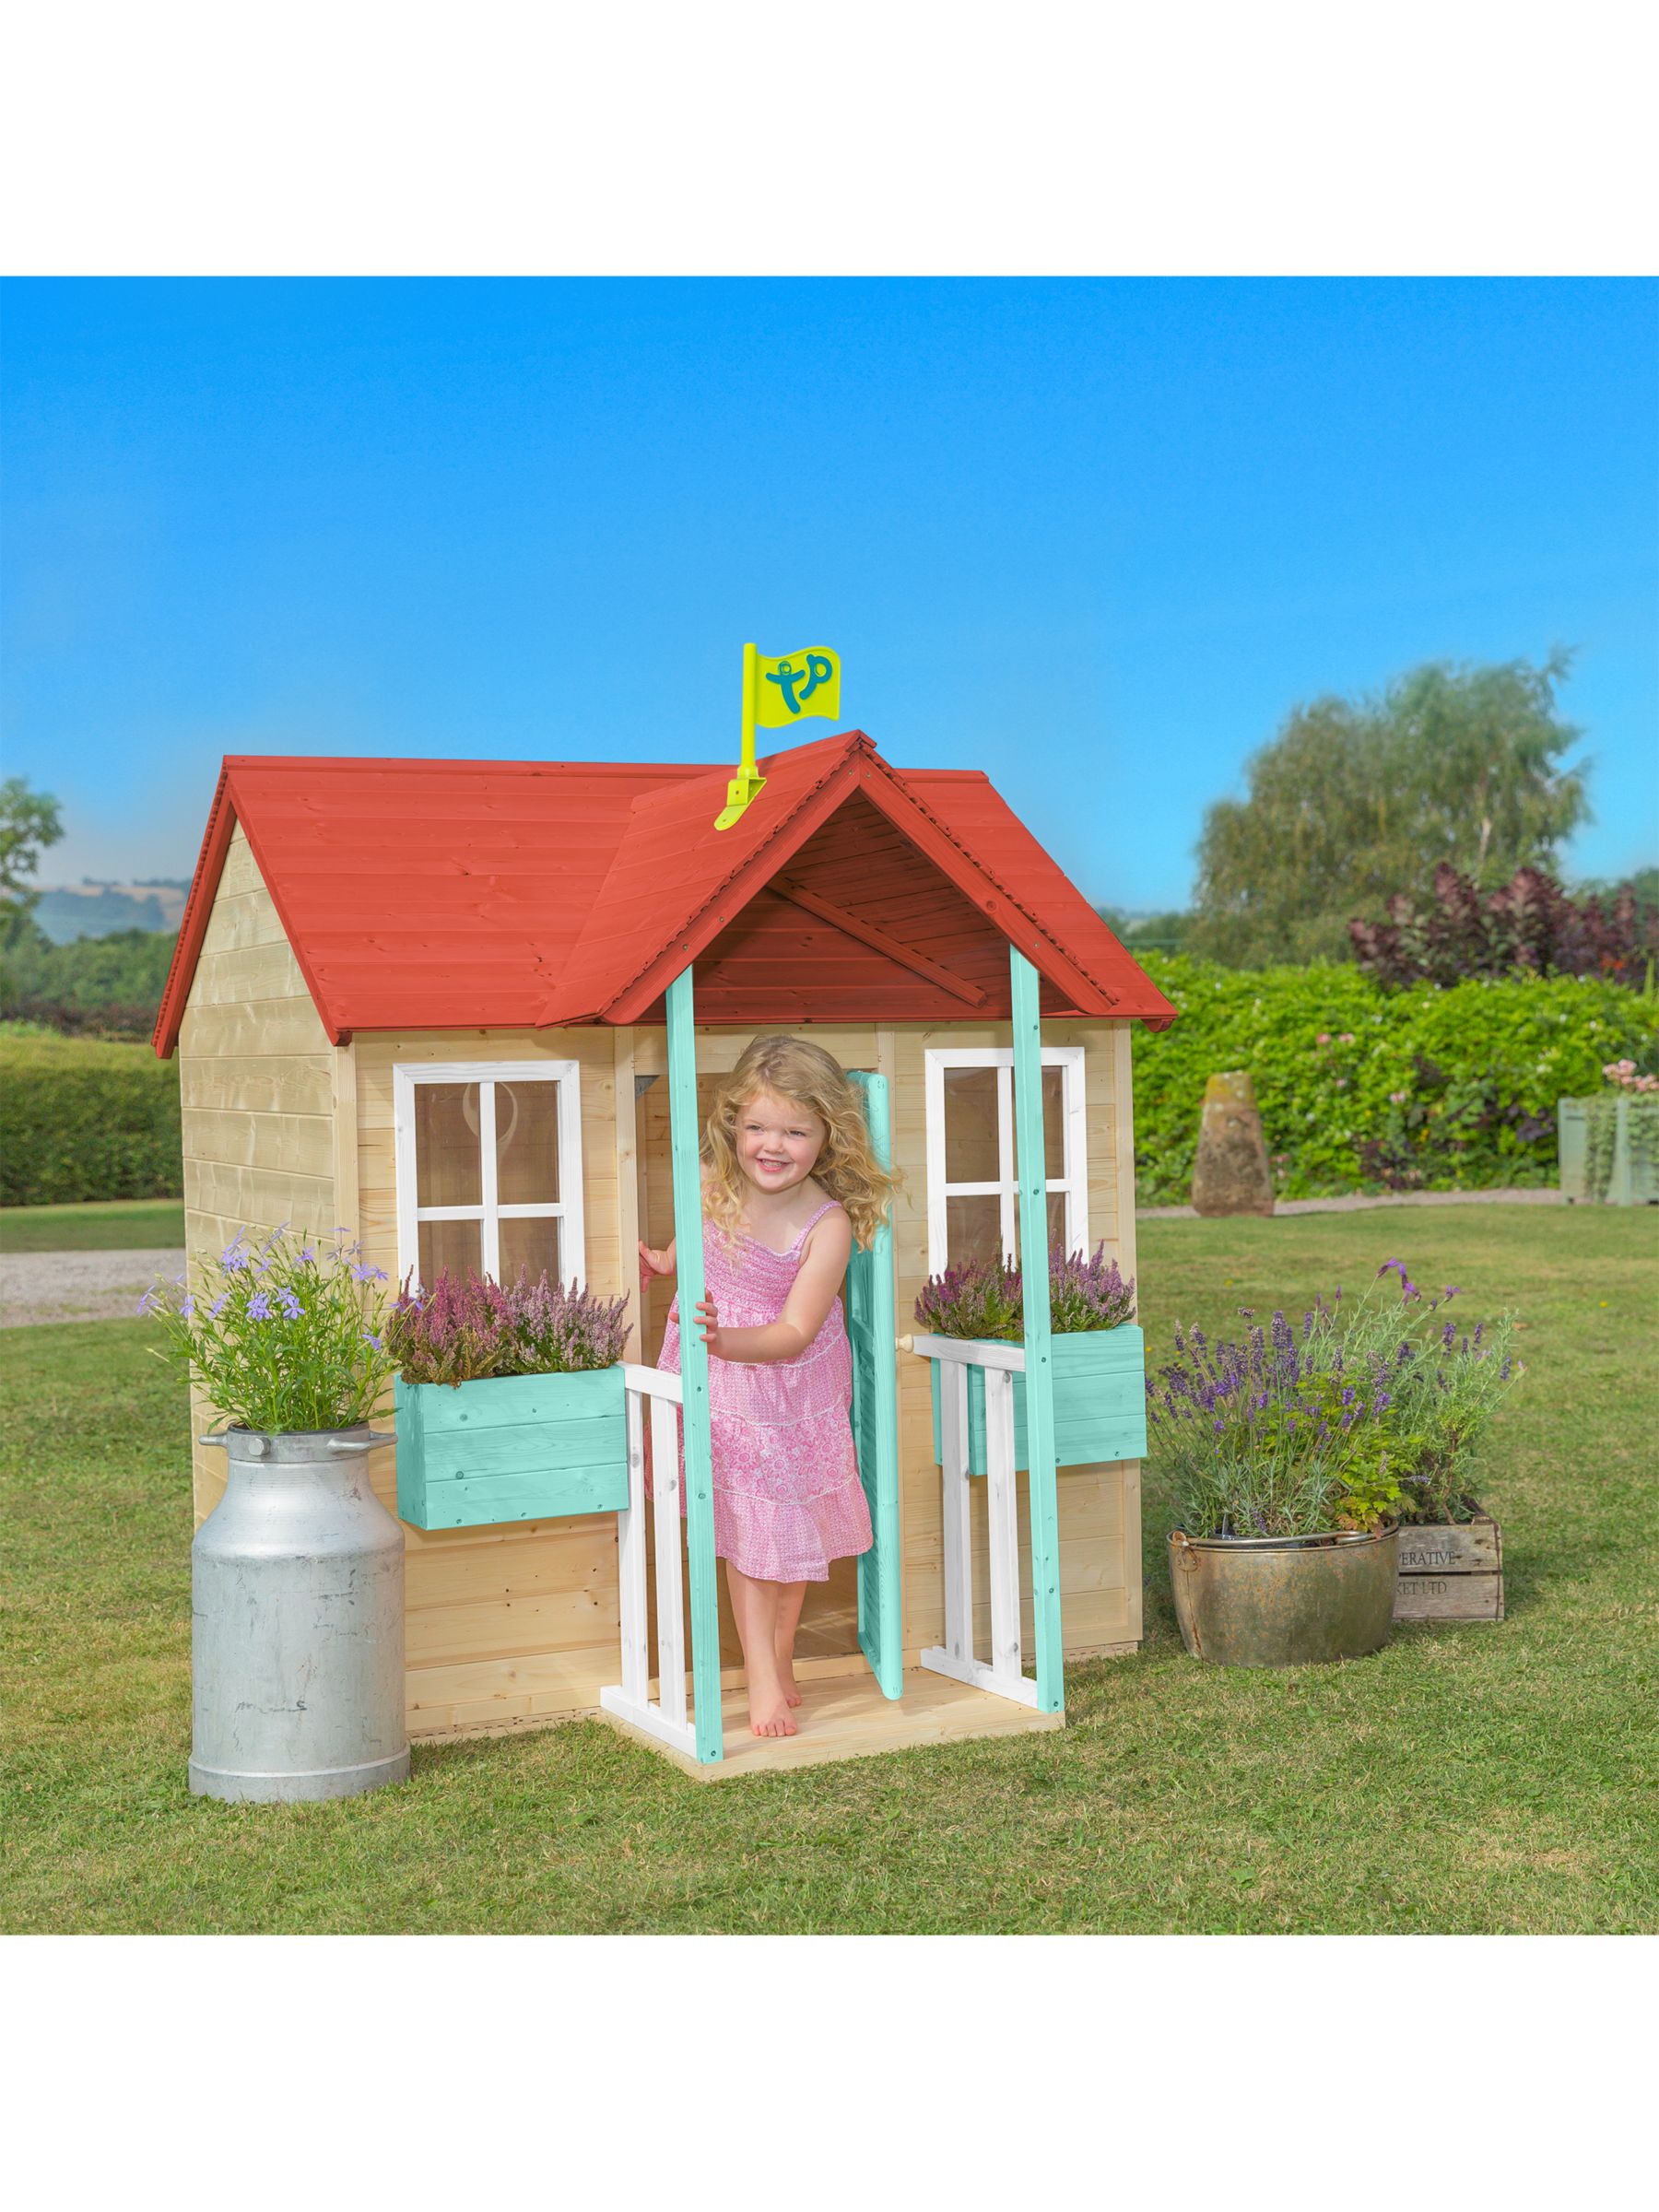 where can i buy a playhouse